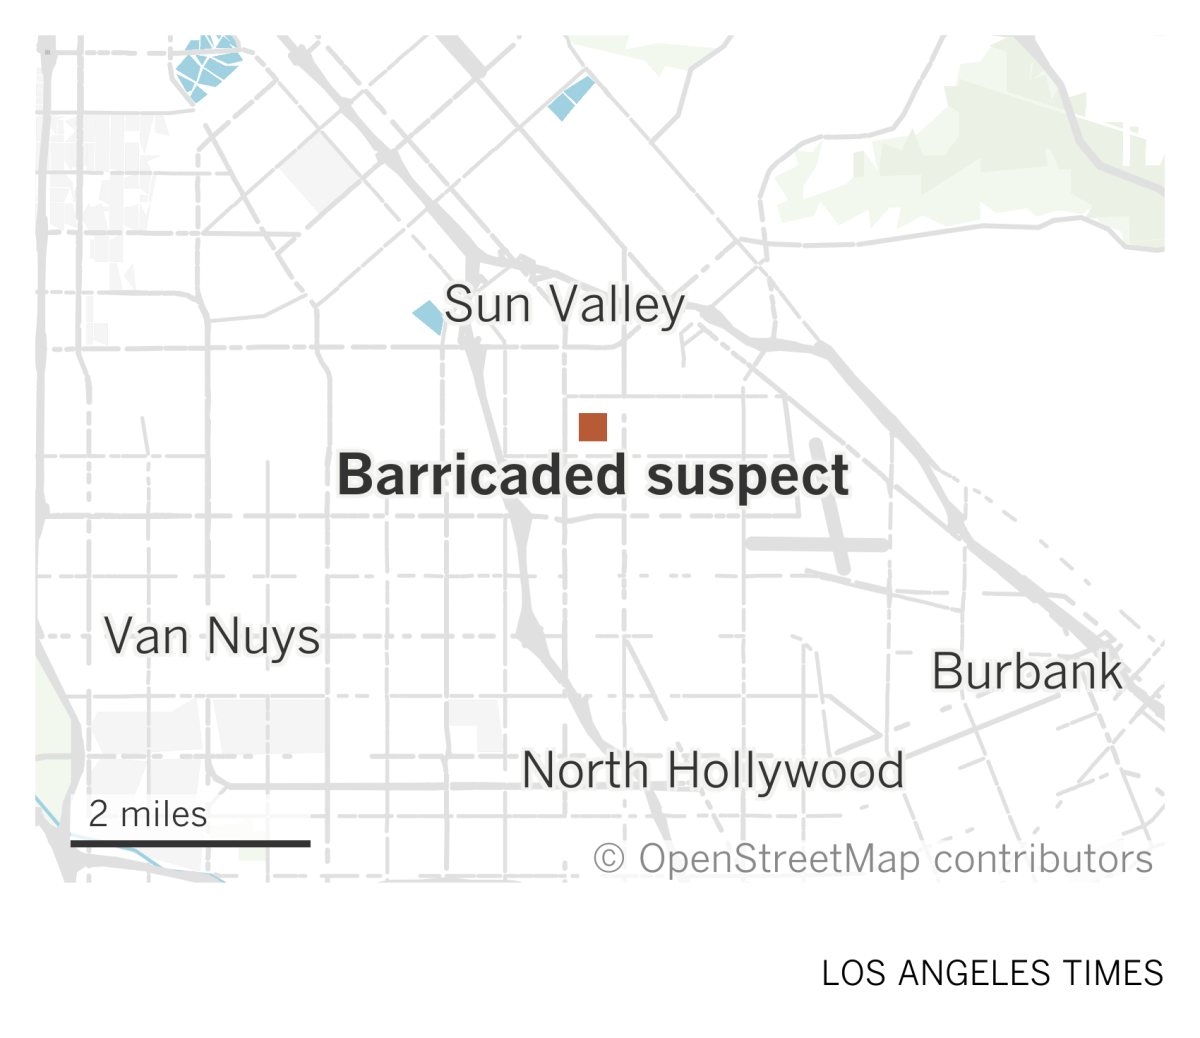 A map of the eastern San Fernando Valley shows where a suspect was barricaded in a home in Sun Valley